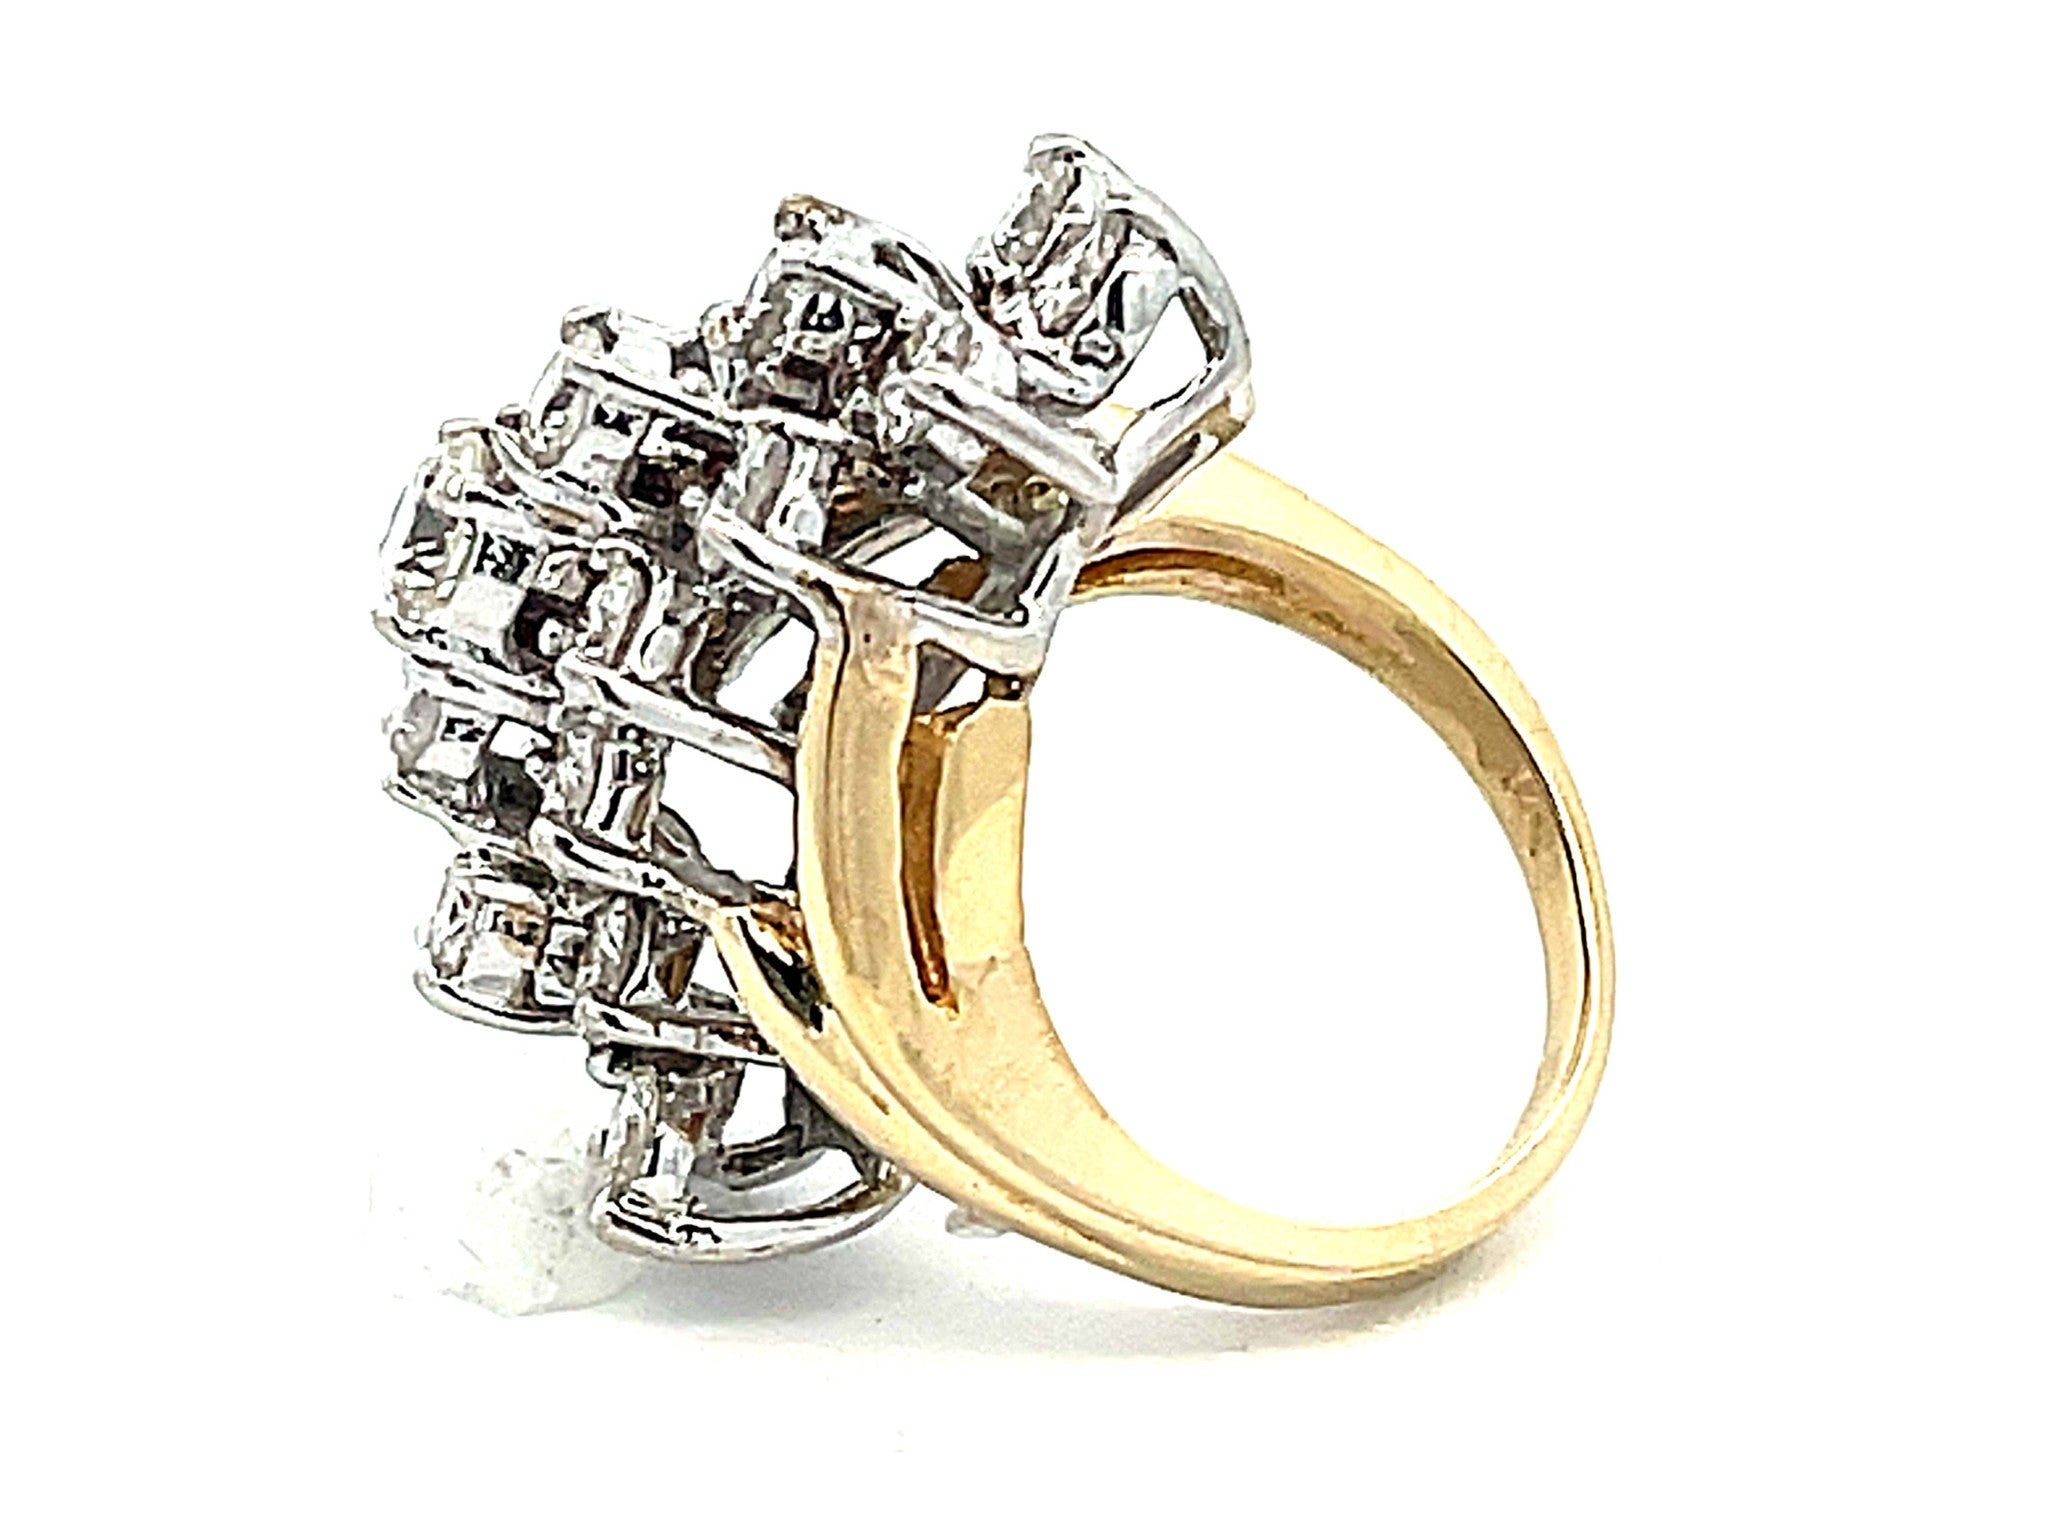 Large Three Vertical Row Diamond Waterfall Ring in 14k White and Yellow Gold